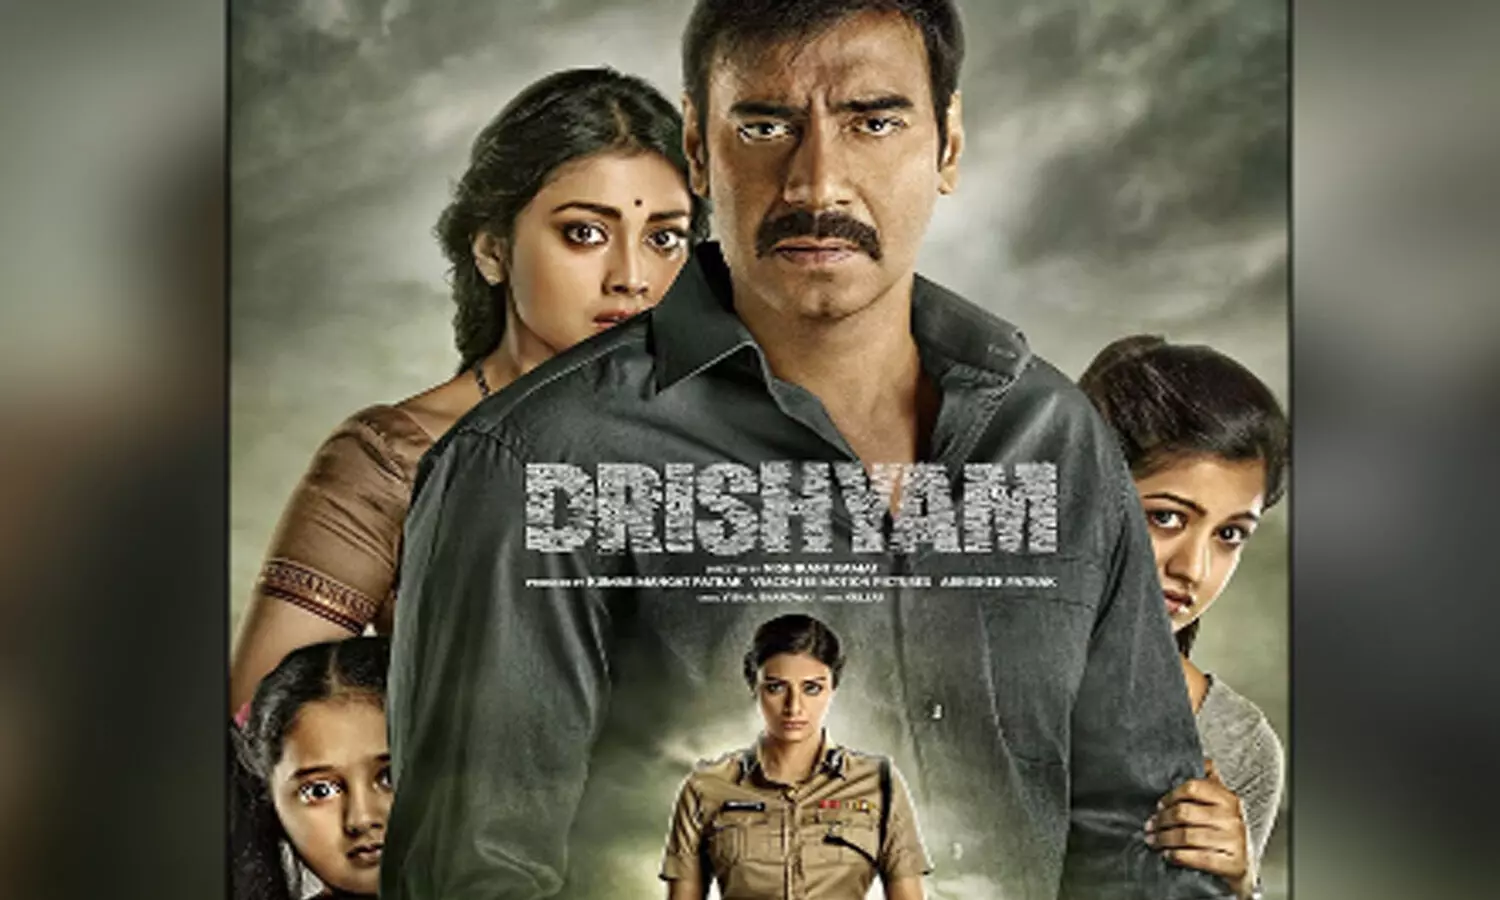 CONFIRM! Ajay Devgn is all set for Hindi remake of Drishyam 2